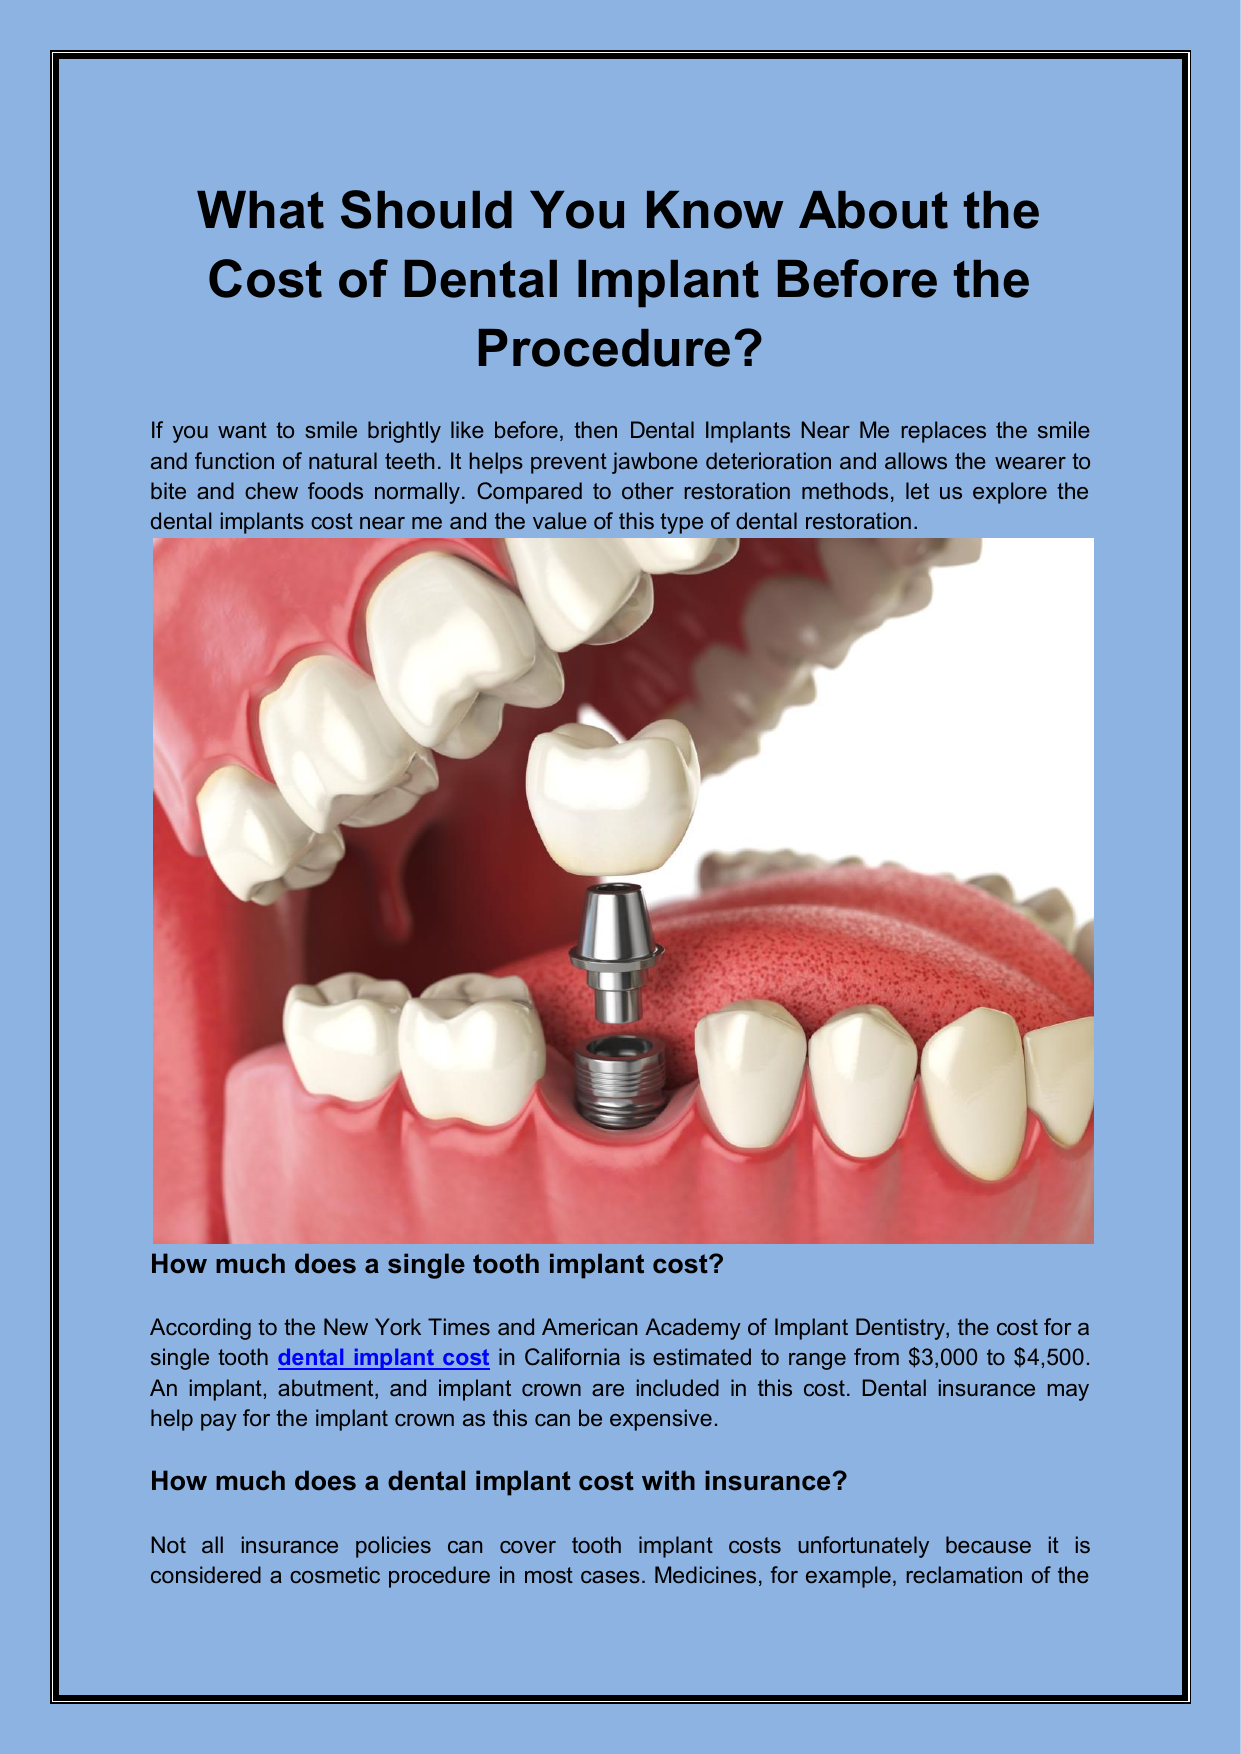 What Should You Know About The Cost Of Dental Implant Before The Procedure